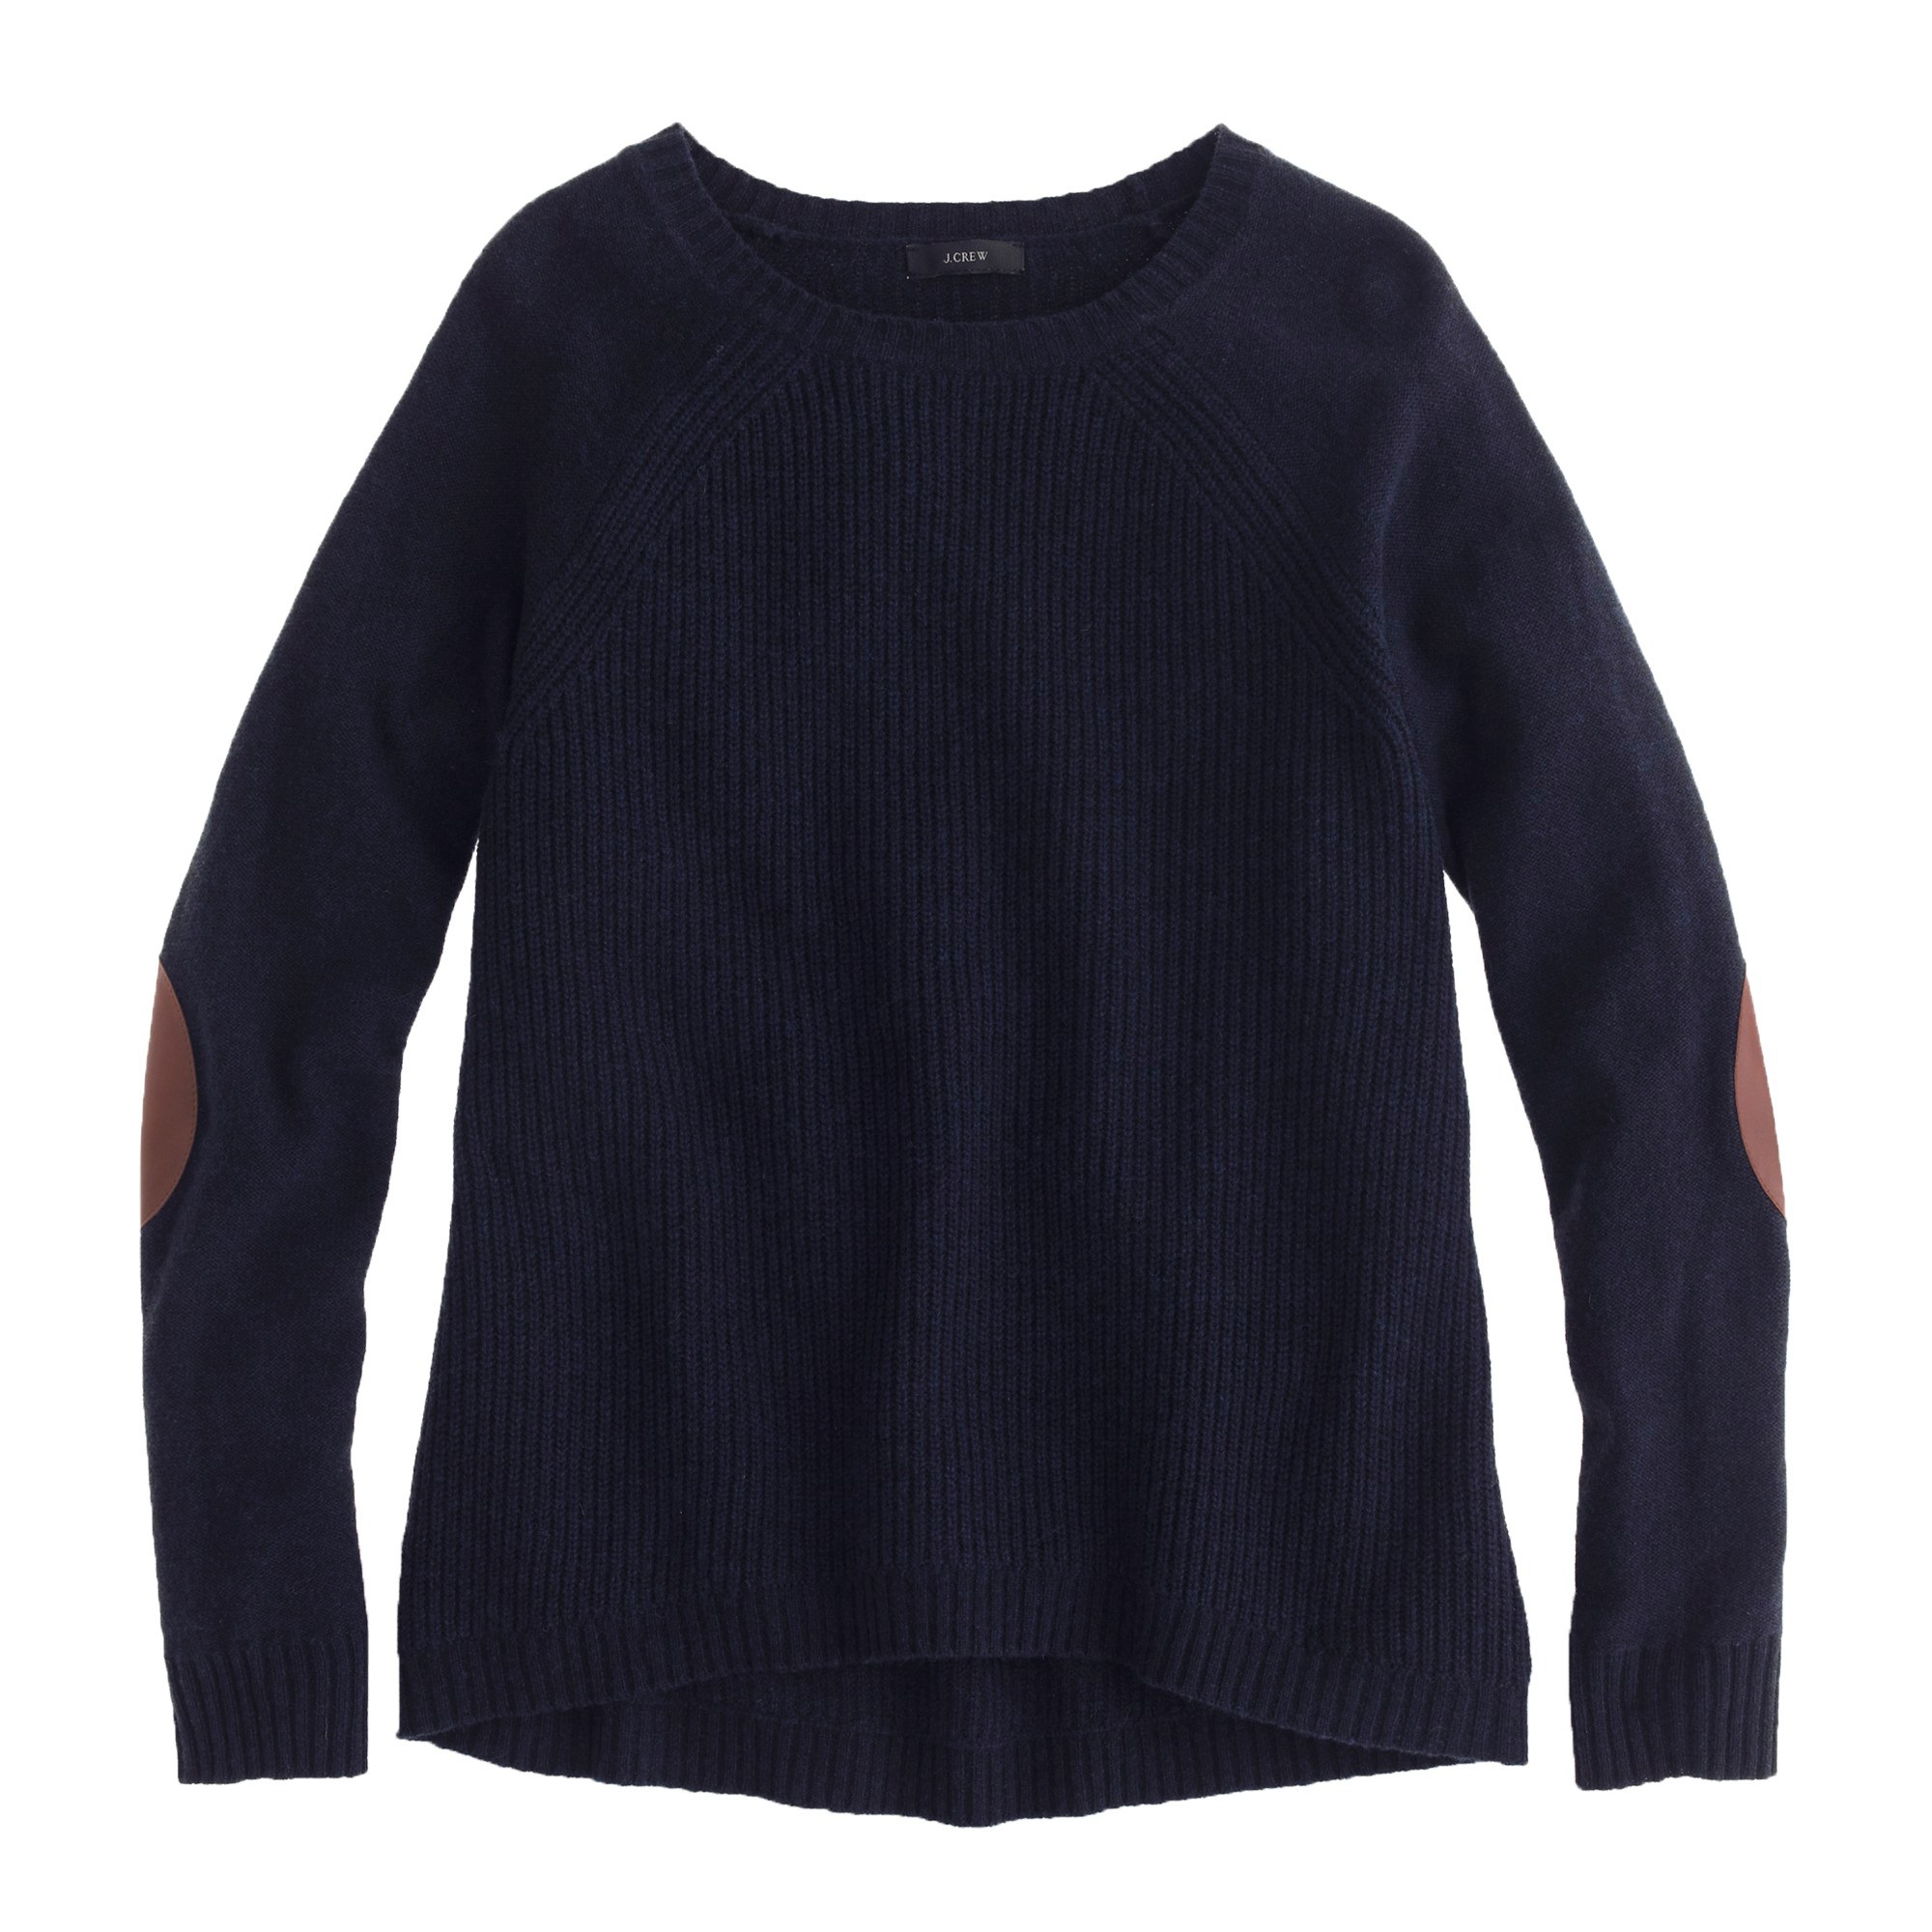 Elbow-patch sweater : Women pullovers | J.Crew